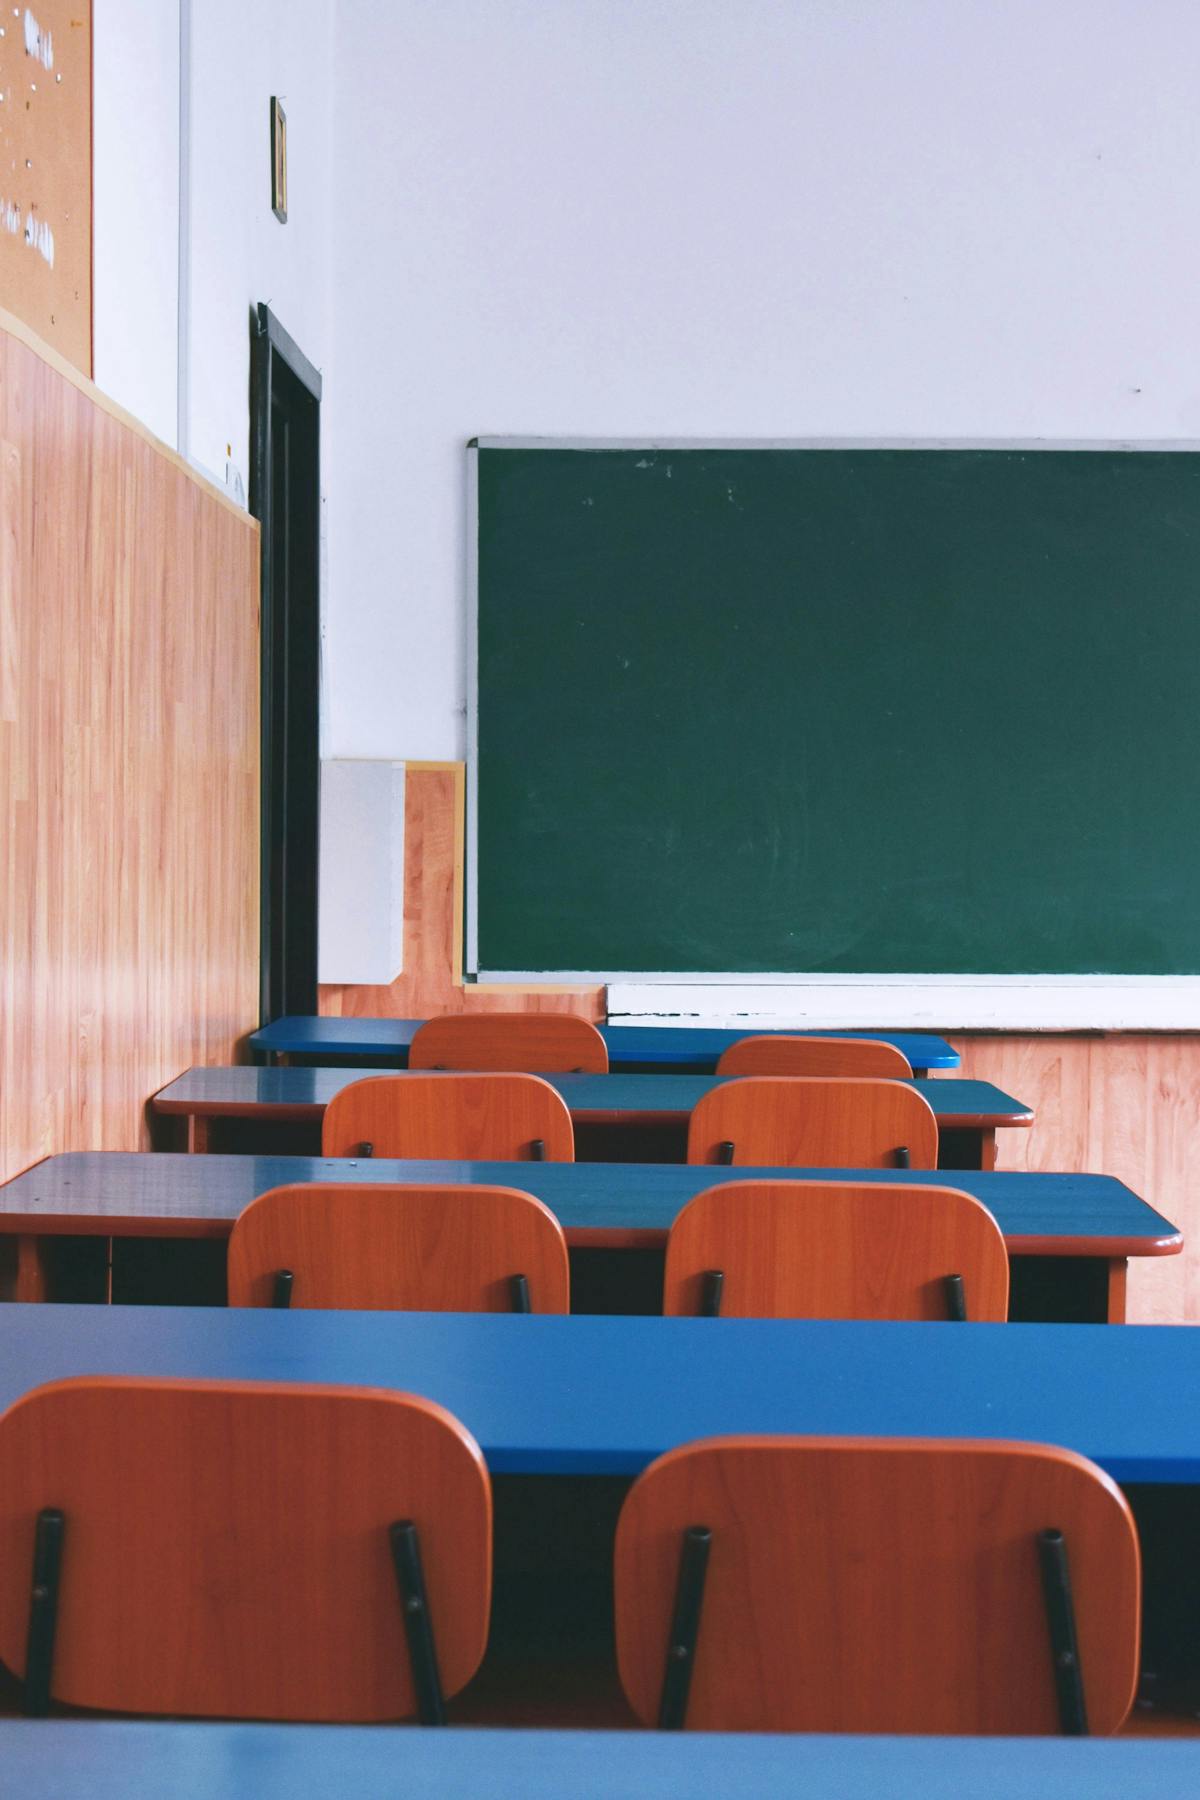 Rows of empty wooden desks face a green chalkboard in a well-lit classroom with wood-paneled walls.